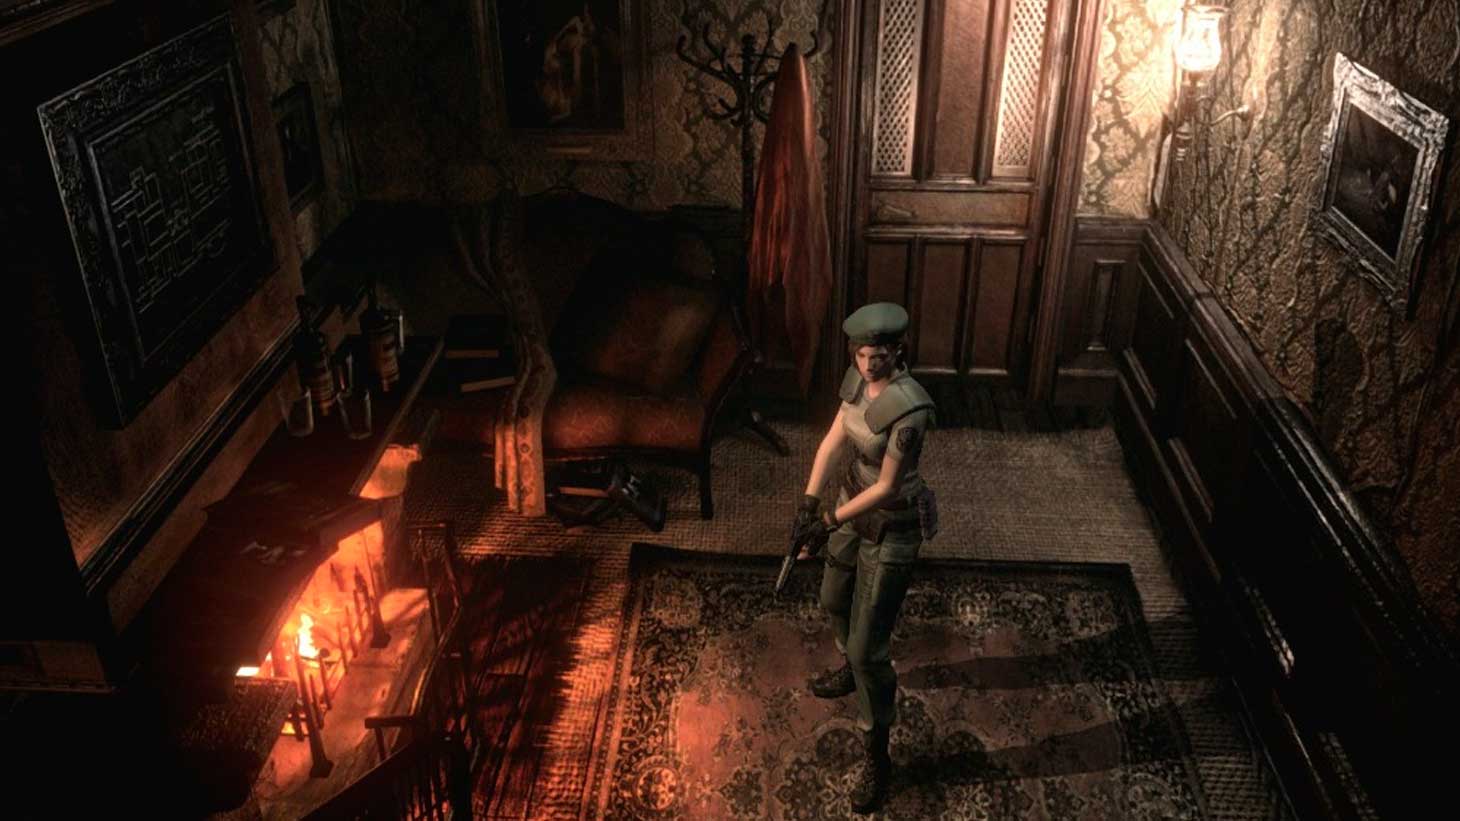 Stay Out of the House, stealth survival horror game, incoming for Switch